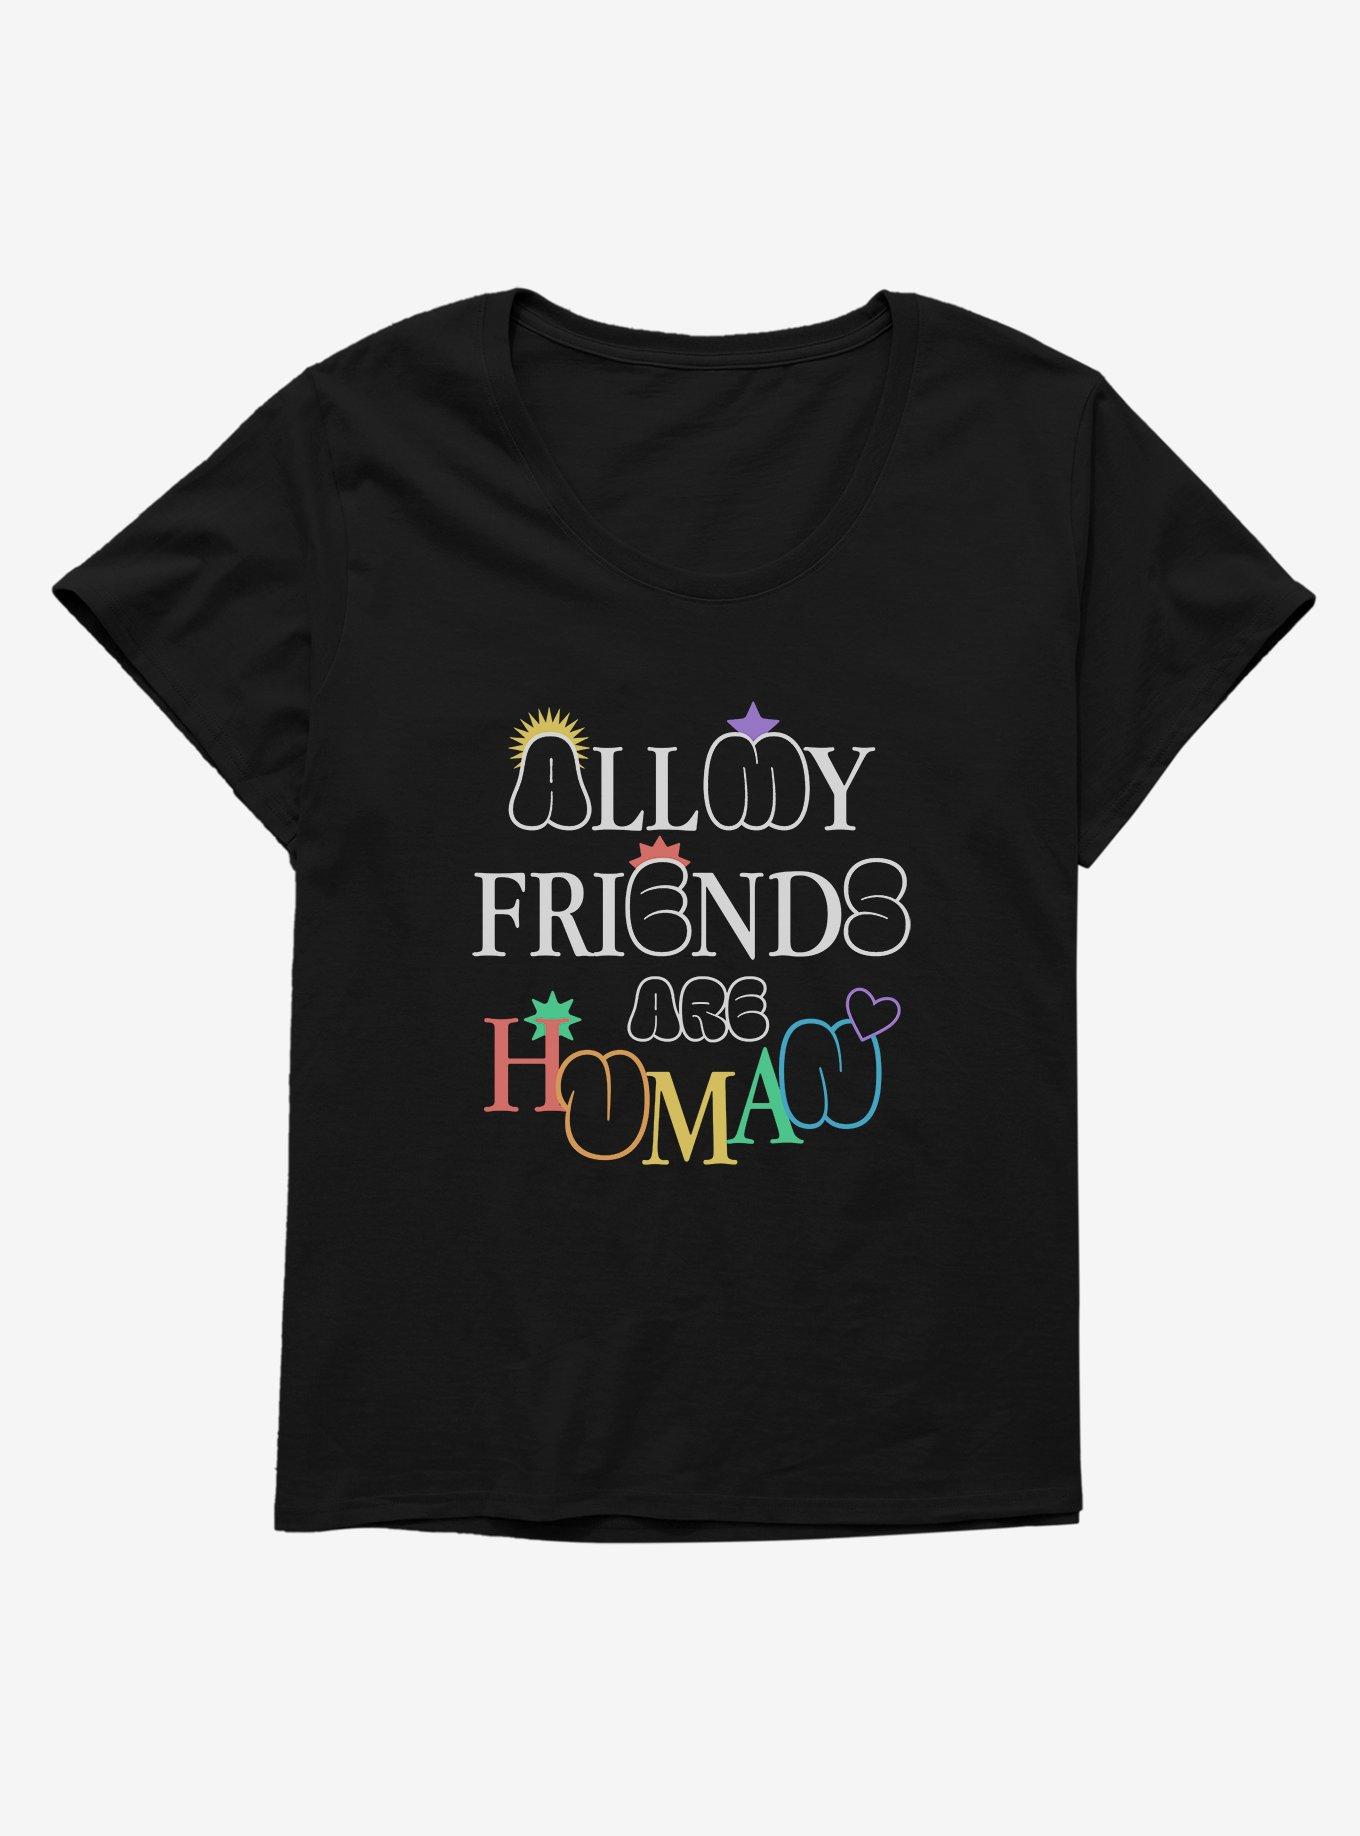 Pride All My Friends Are Human Girls T-Shirt Plus Size, BLACK, hi-res